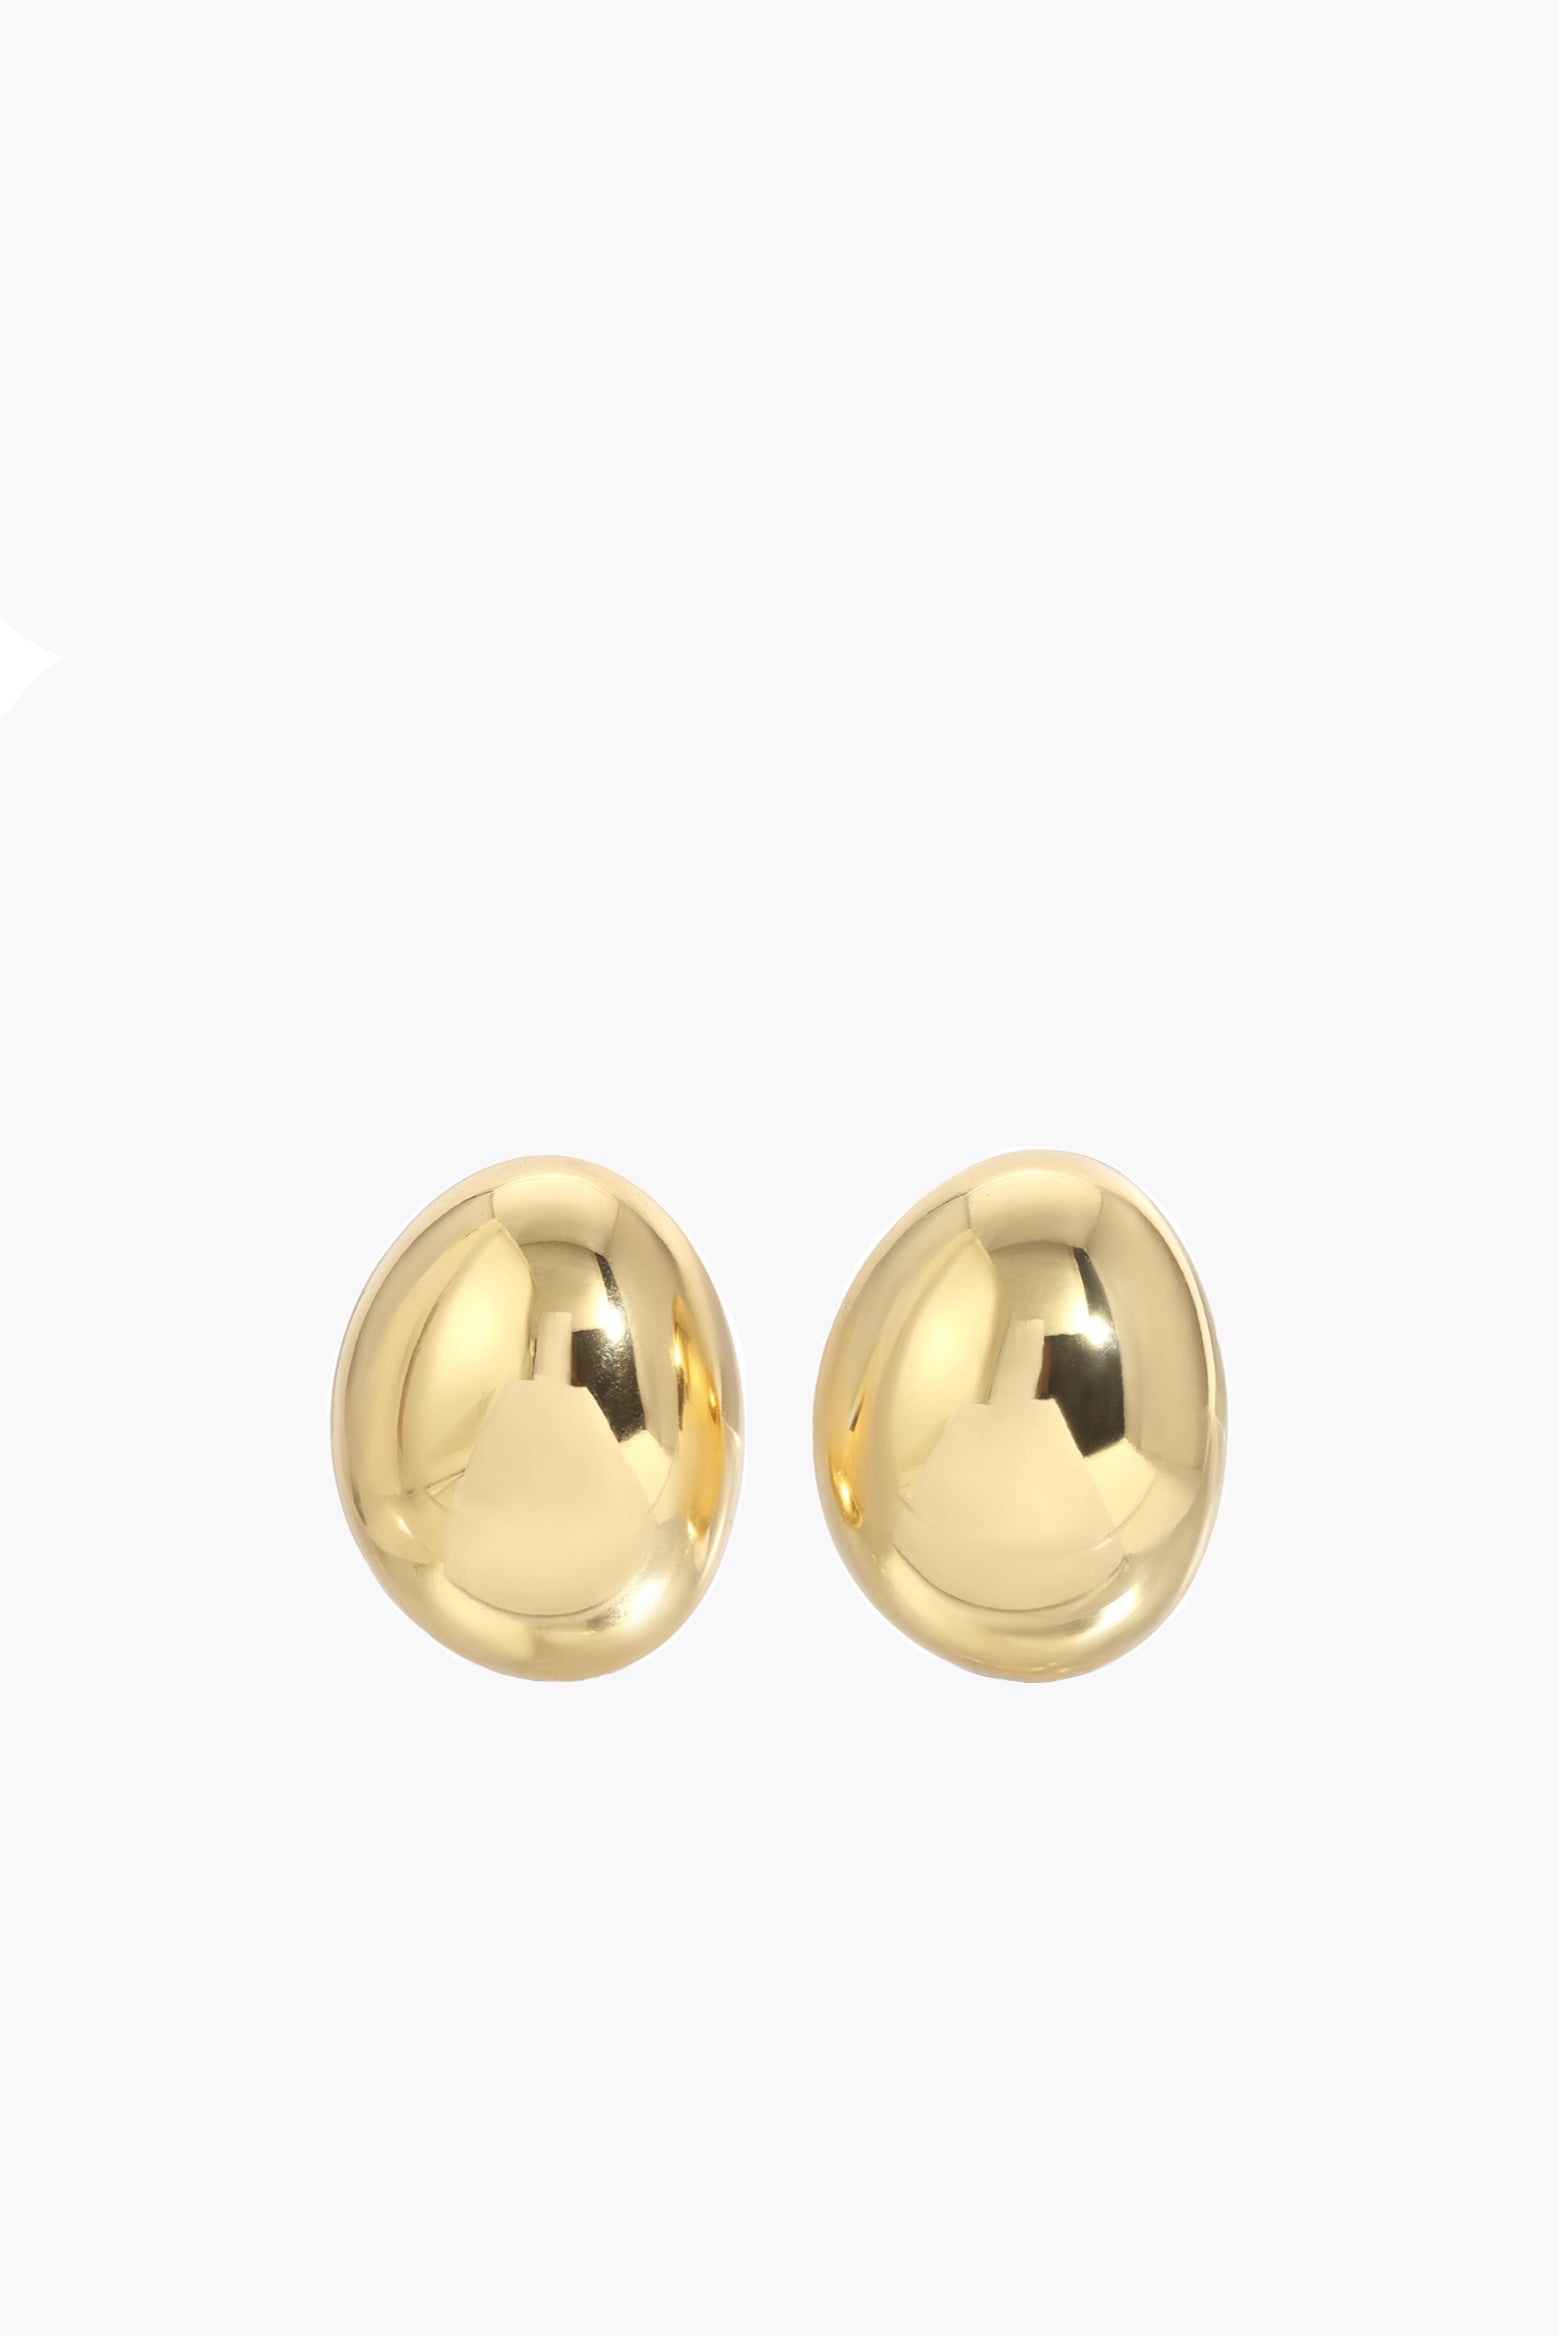 Eclatant Allegra Earring in Gold available at The New Trend Australia.